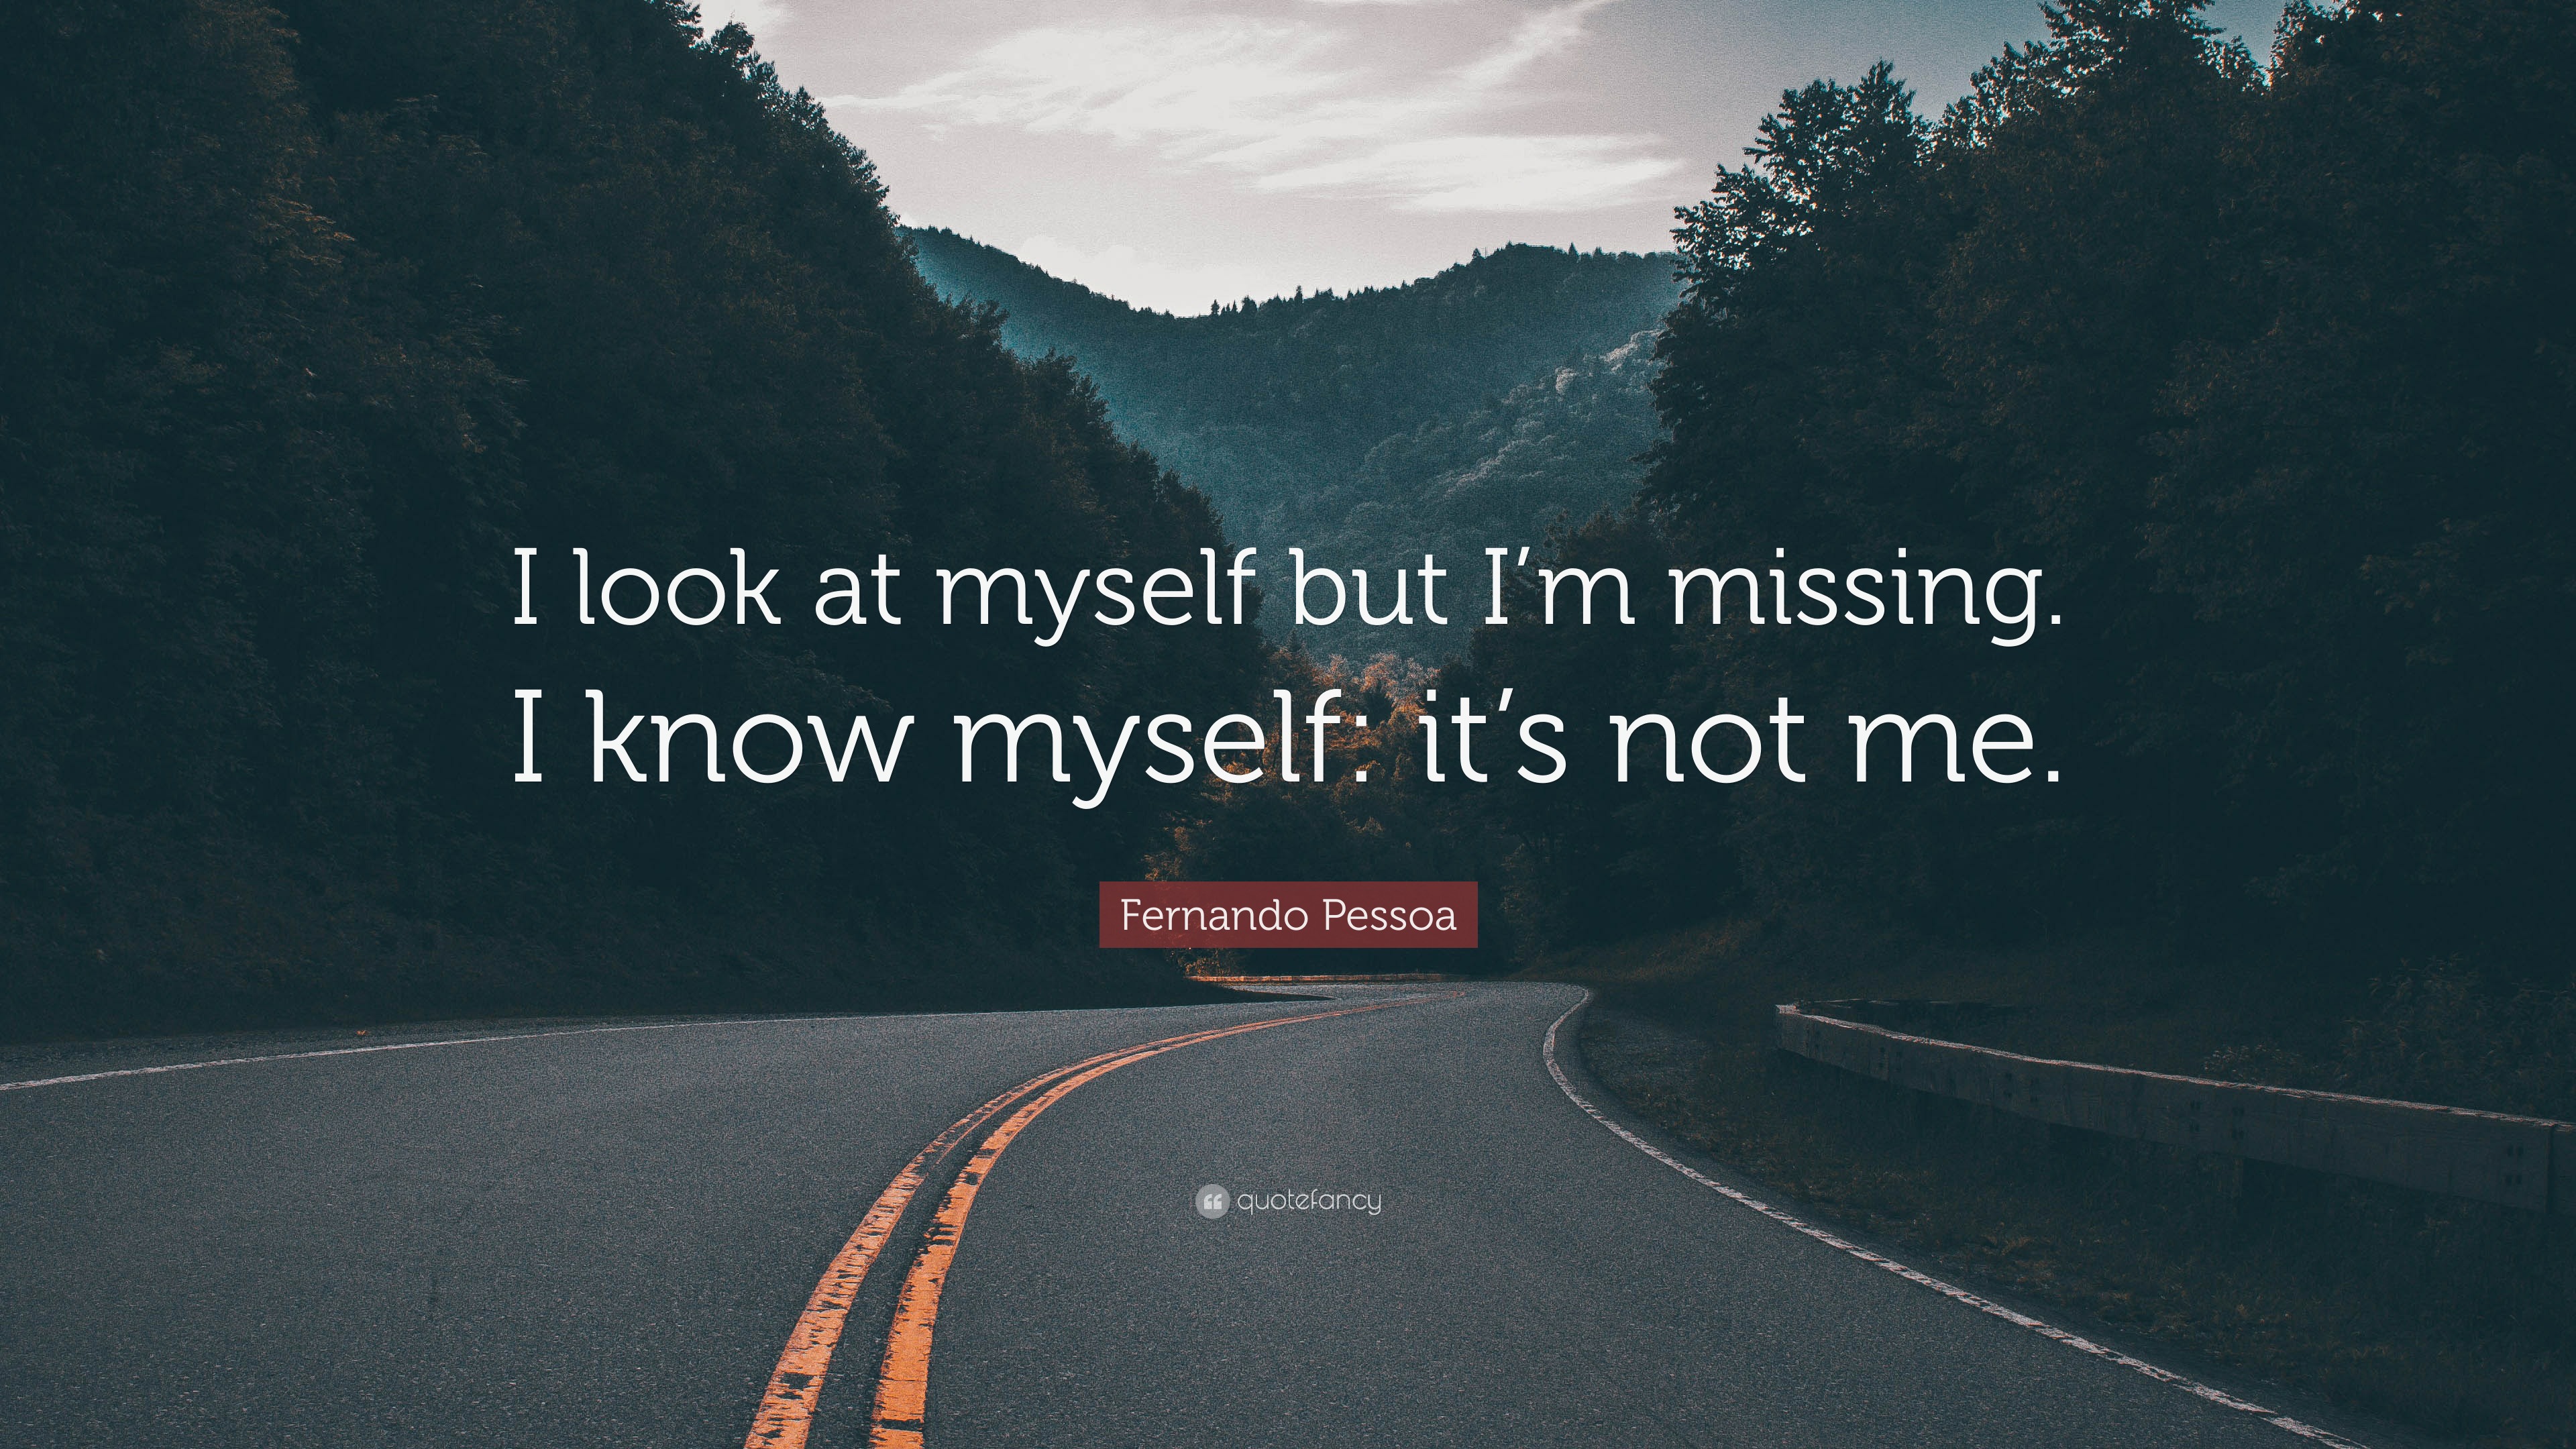 Fernando Pessoa Quote: “It's been a long time since I've been me.”